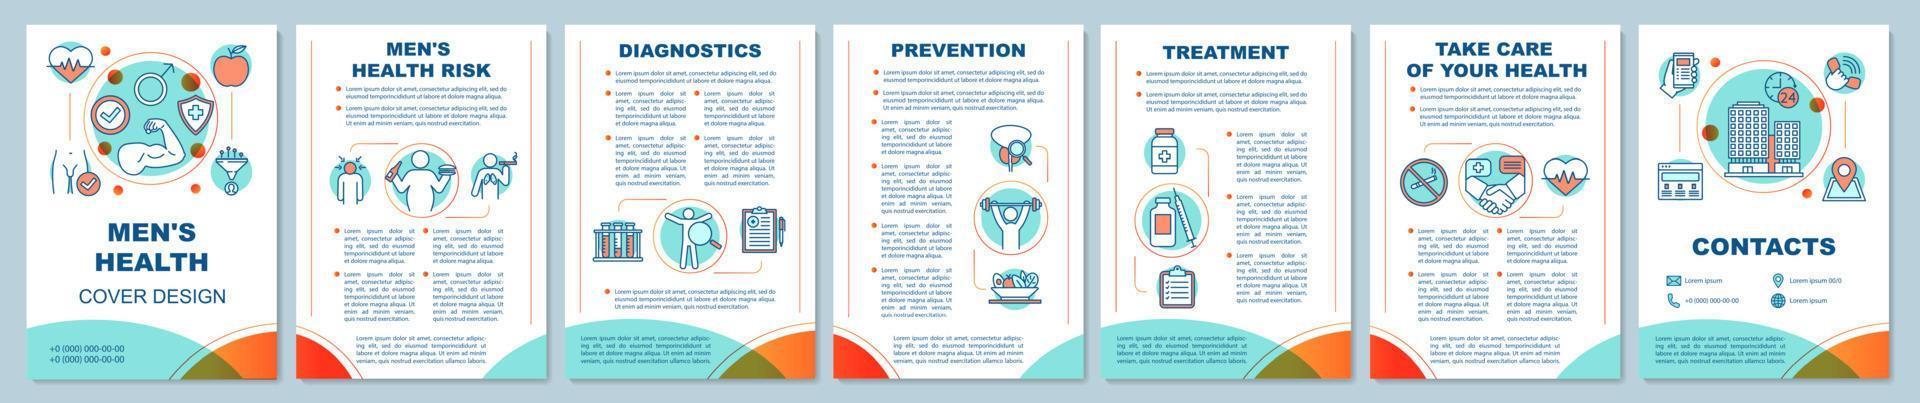 Men's health brochure template layout. Male health risks factors. Healthy lifestyle. Flyer, booklet, leaflet print design. Vector page layouts for magazines, annual reports, advertising posters